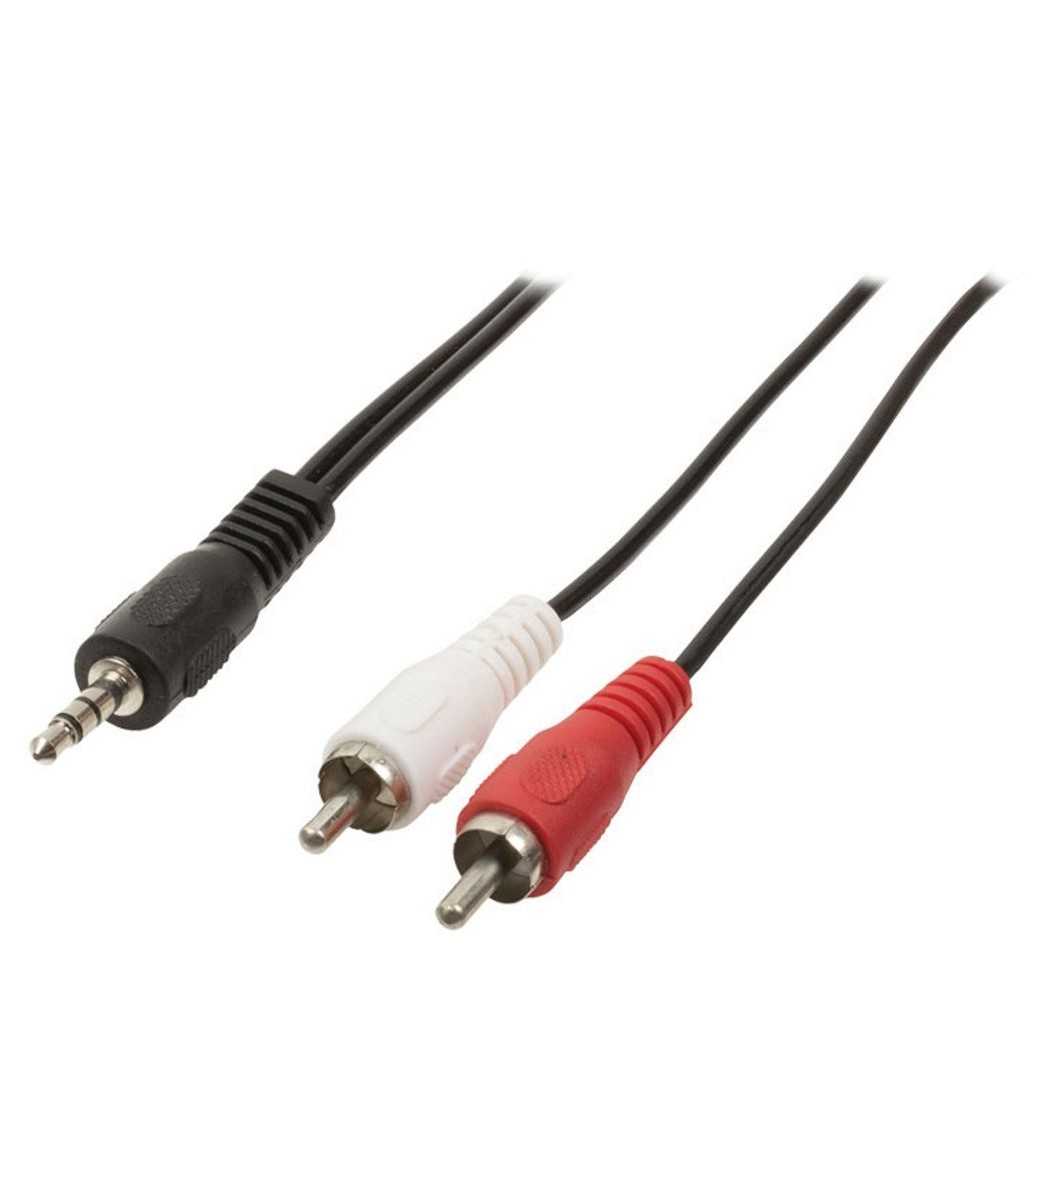 RCA to 3.5mm headphone jack cable - 2.5m Length